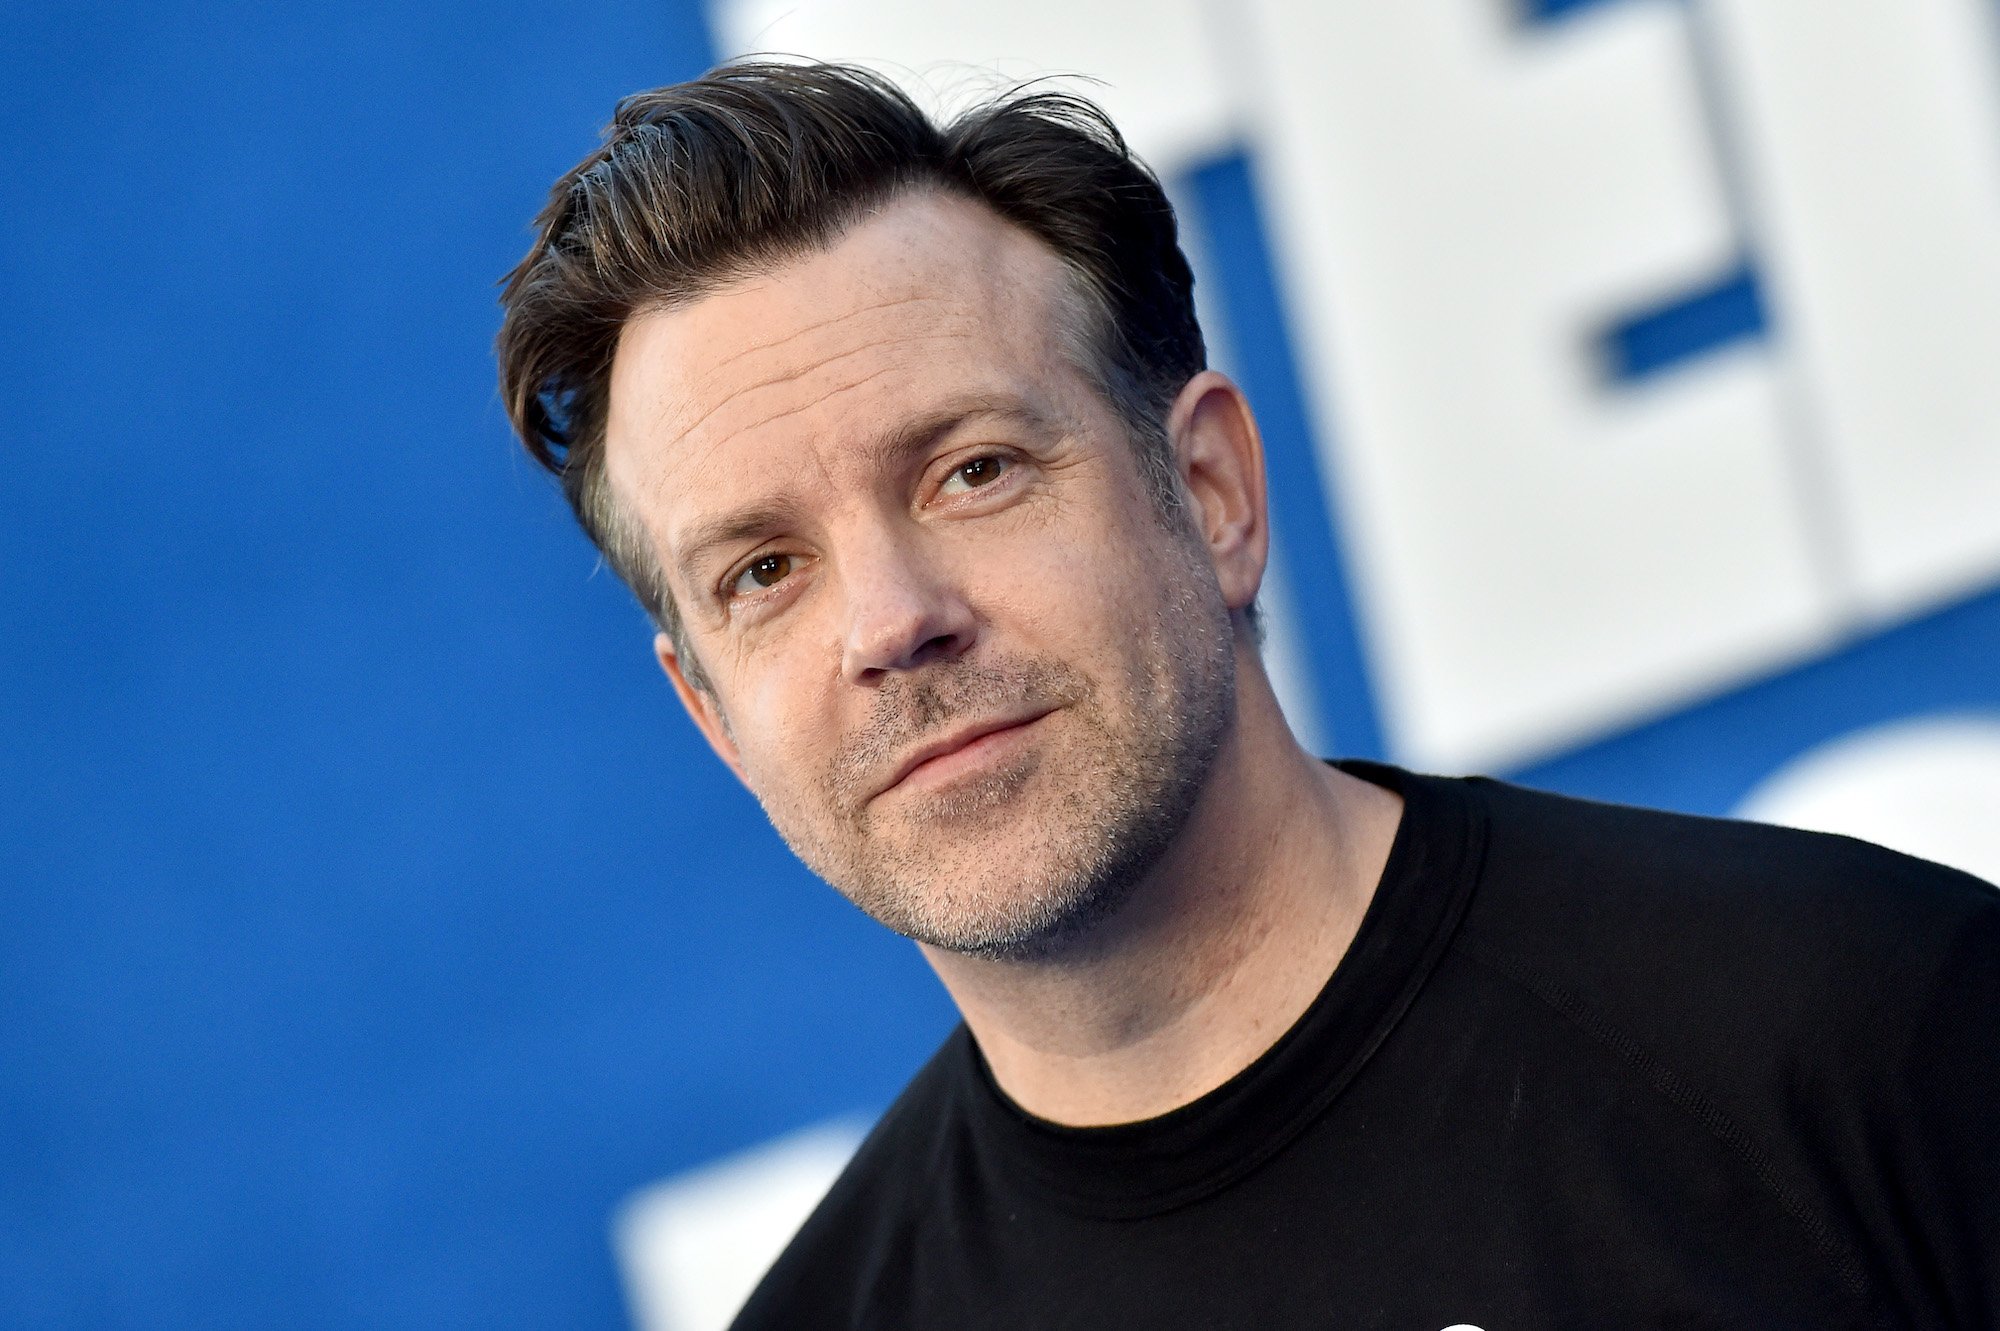 Jason Sudeikis smiling in front of a blue bathroom